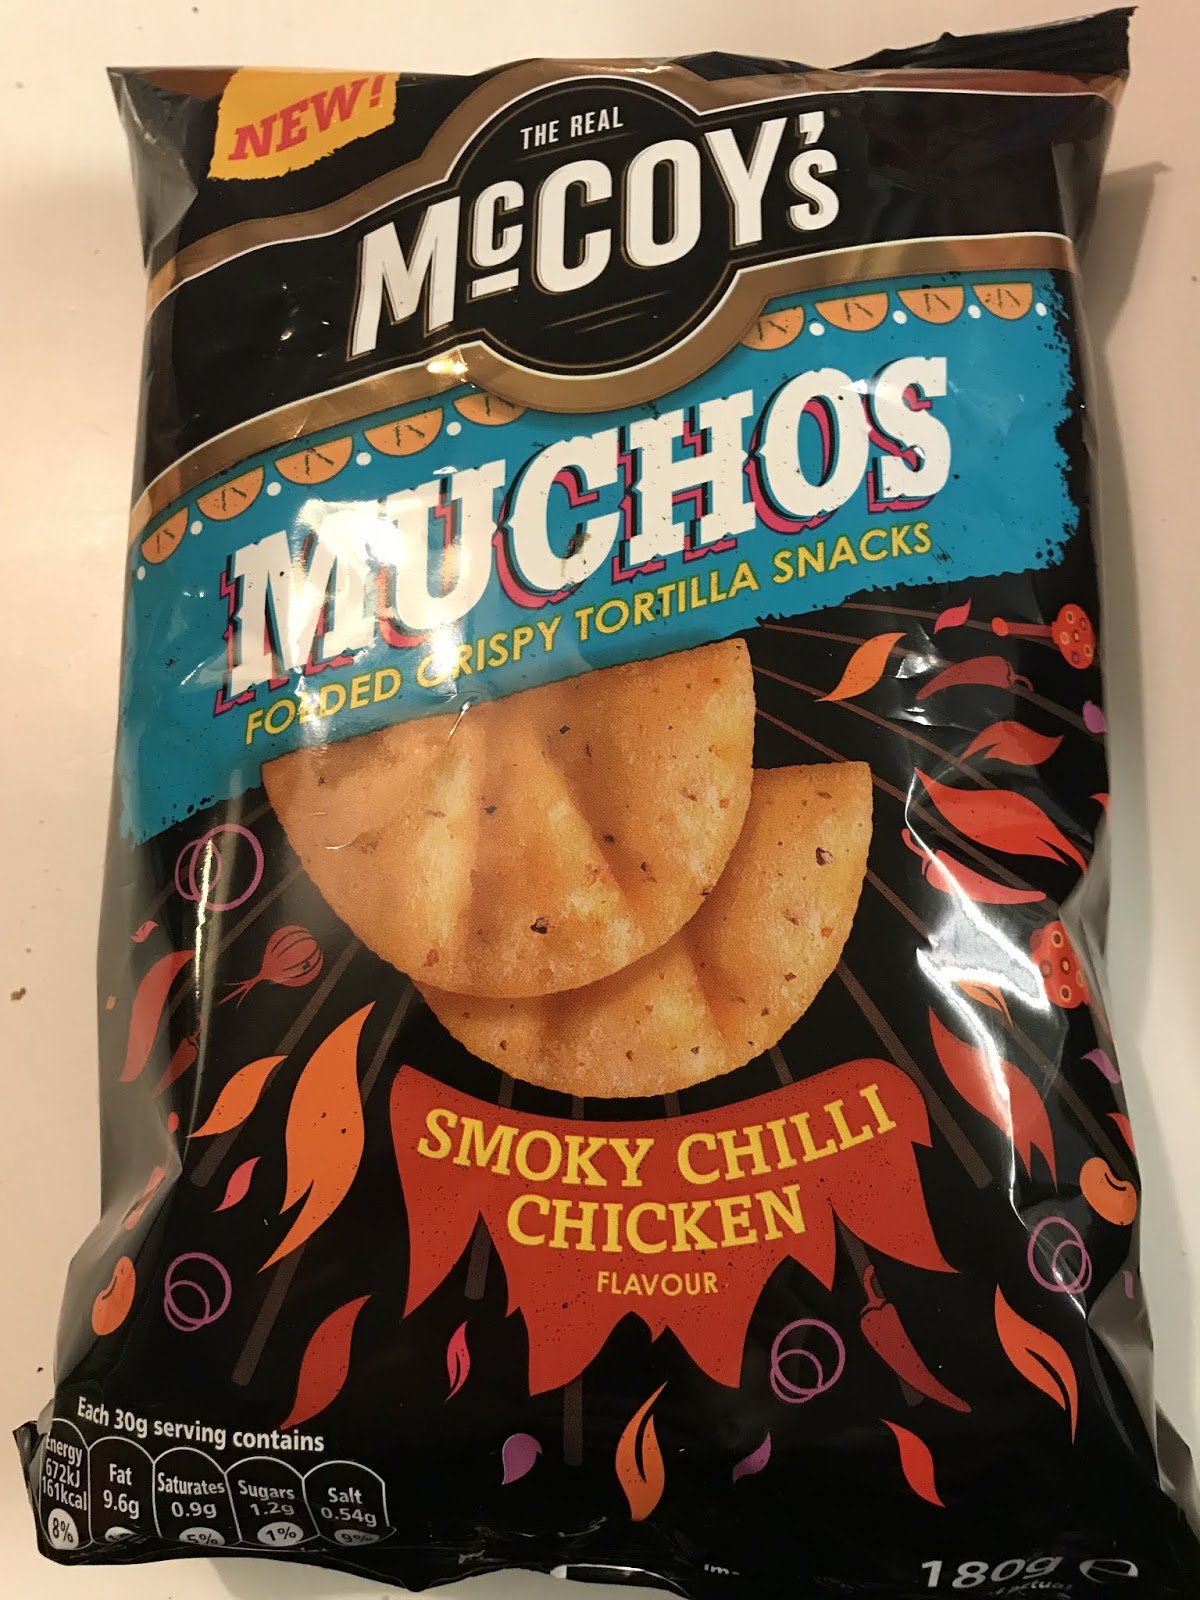 A Review A Day: Today’s Review: McCoy’s Muchos Smoky Chilli Chicken